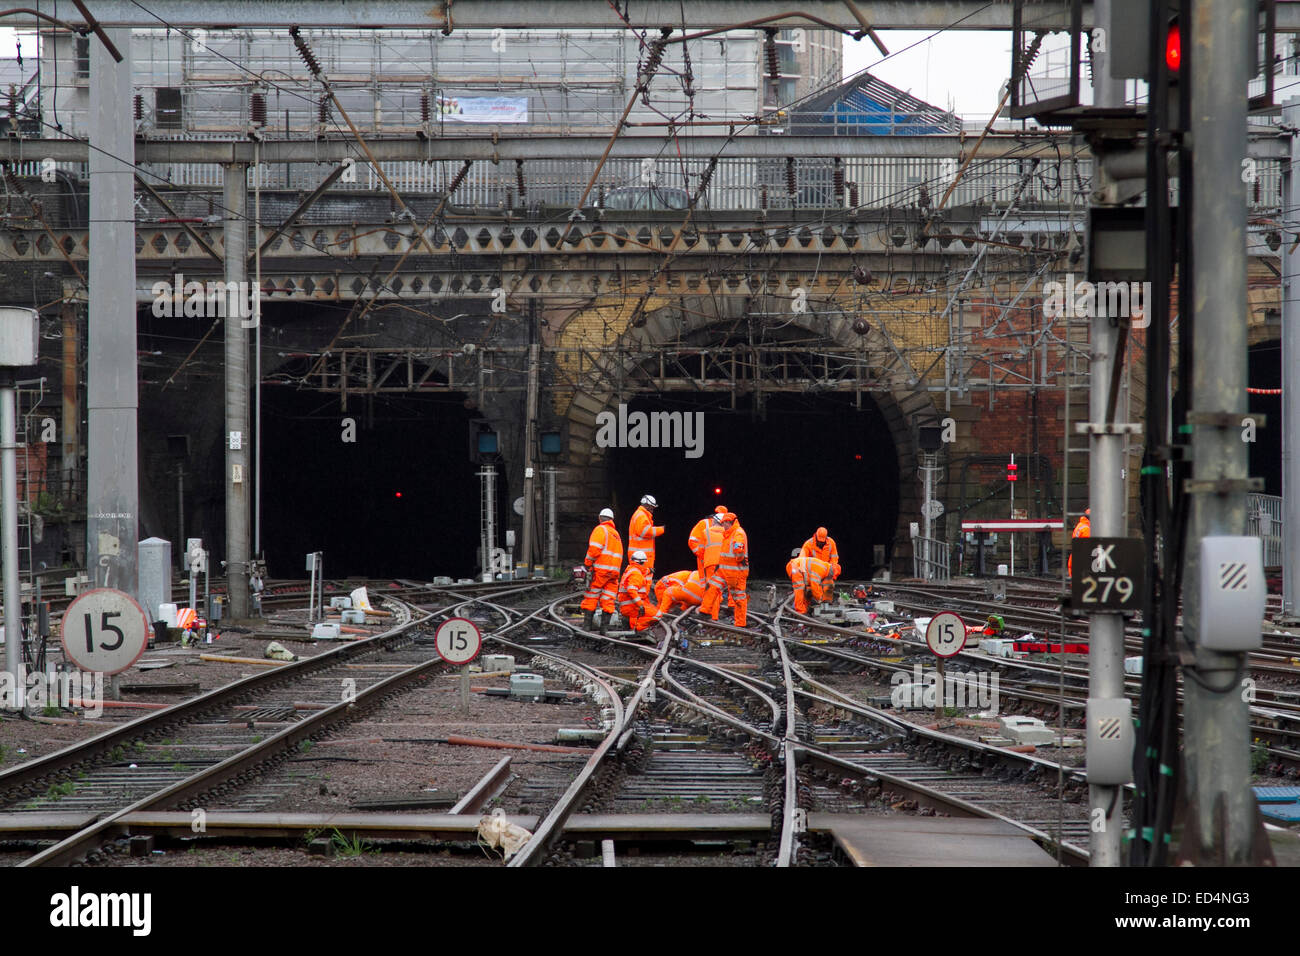 London UK. 27th December 2014. Trains have been cancelled at Kings Cross mainline station due to overrunning engineering works causing major disruption to passenger travel plans Credit:  amer ghazzal/Alamy Live News Stock Photo